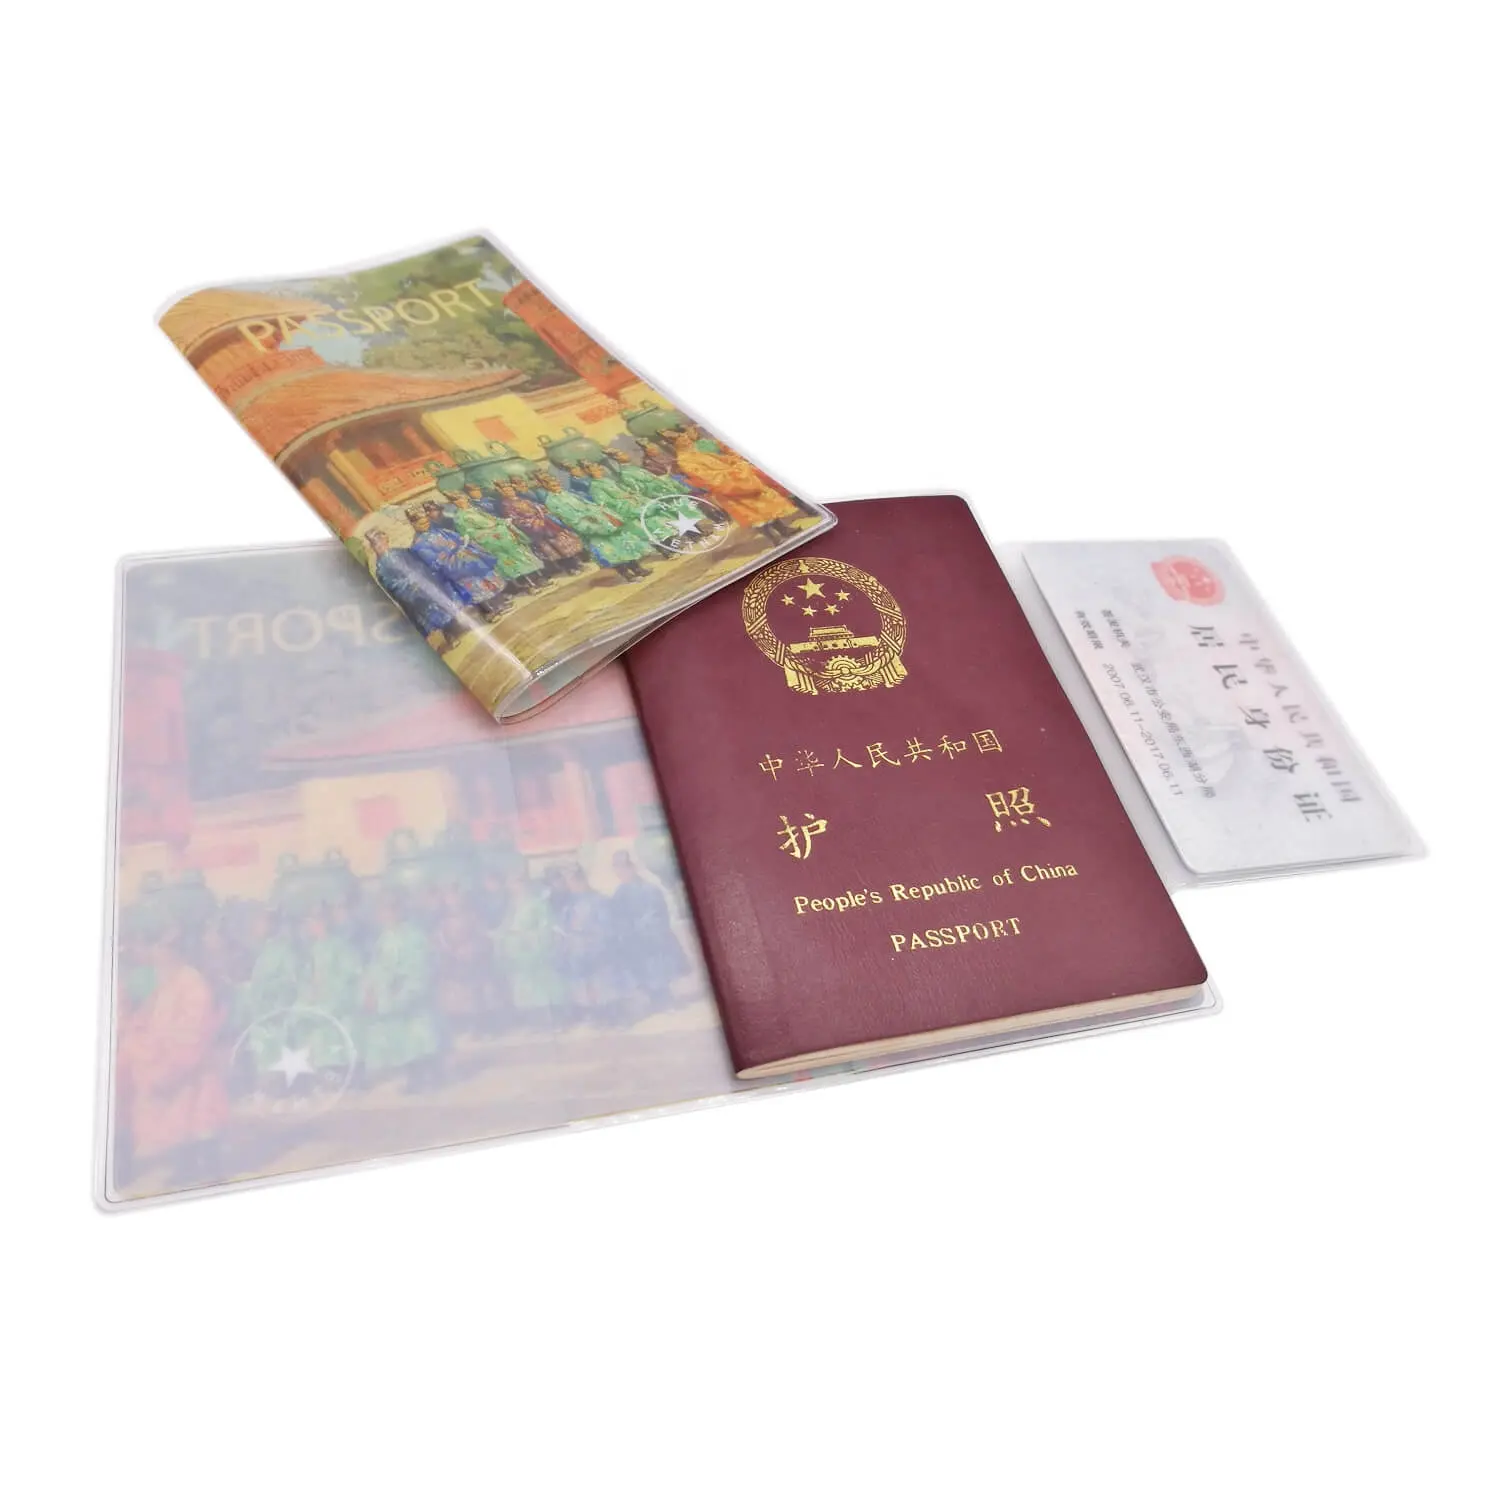 Pack Clear PVC Binding Presentation Covers Report book Cover for Business Documents transparent and waterproof